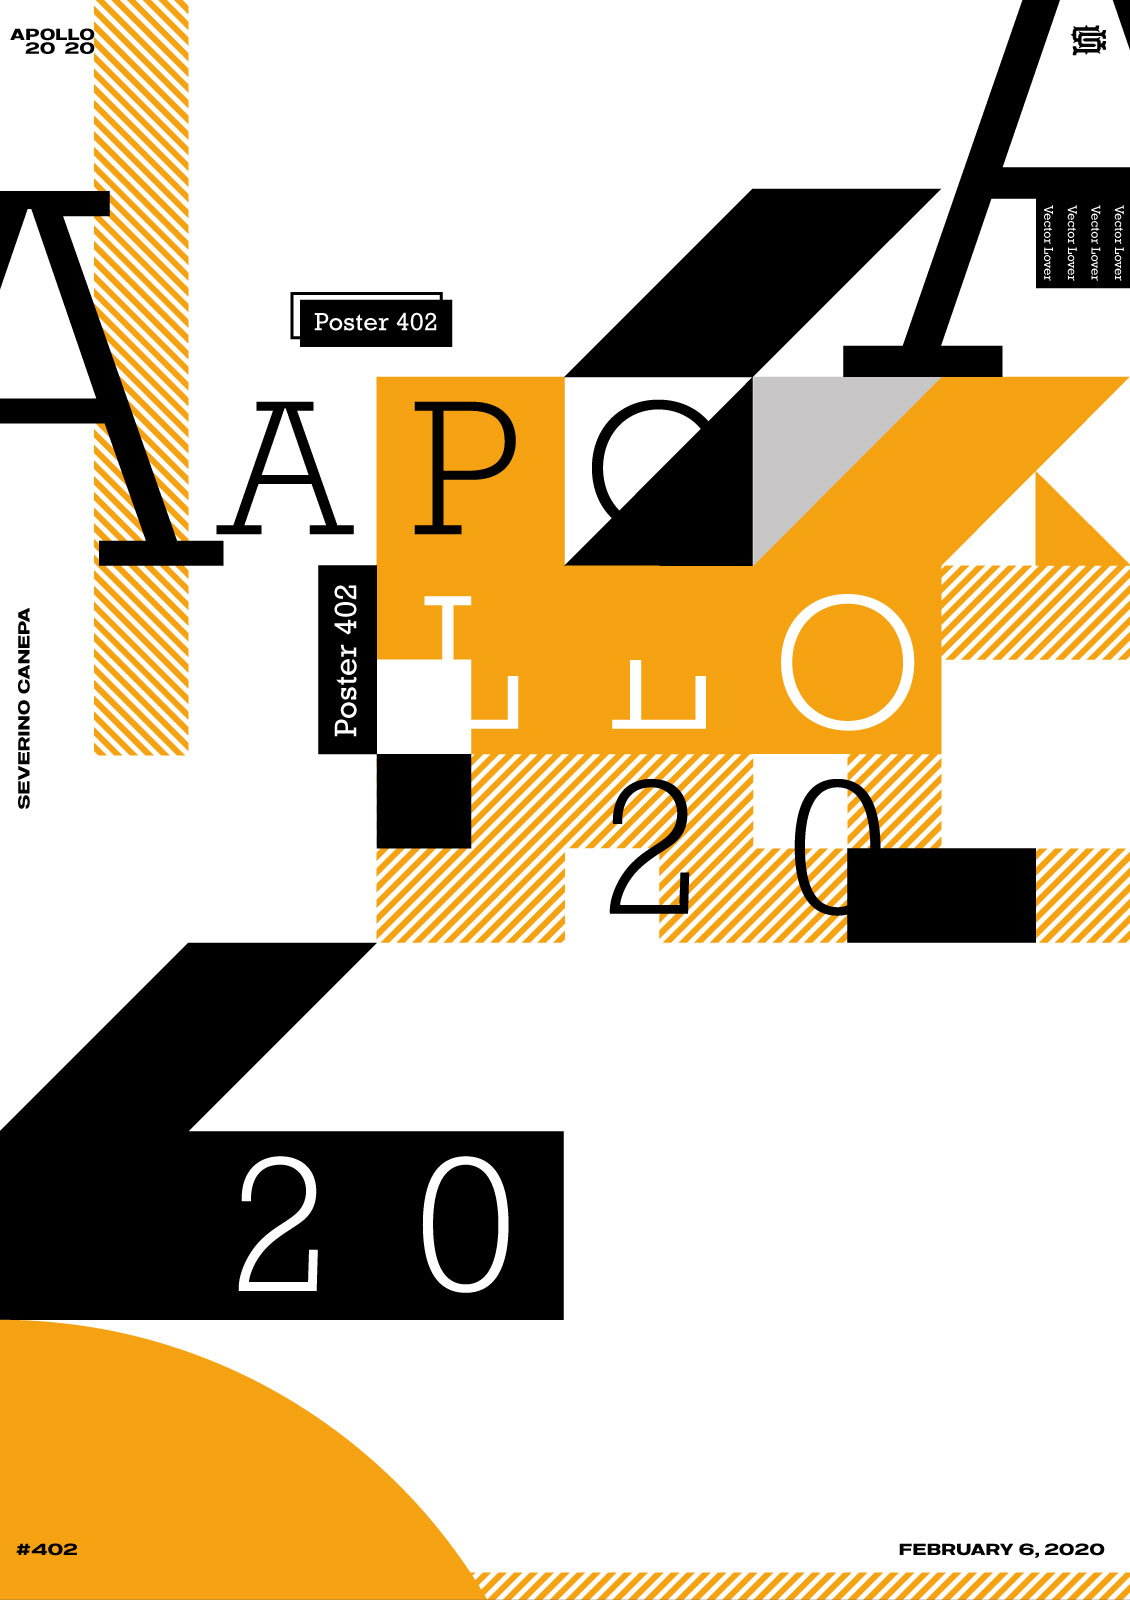 Visual of the poster design 402 based on vectors